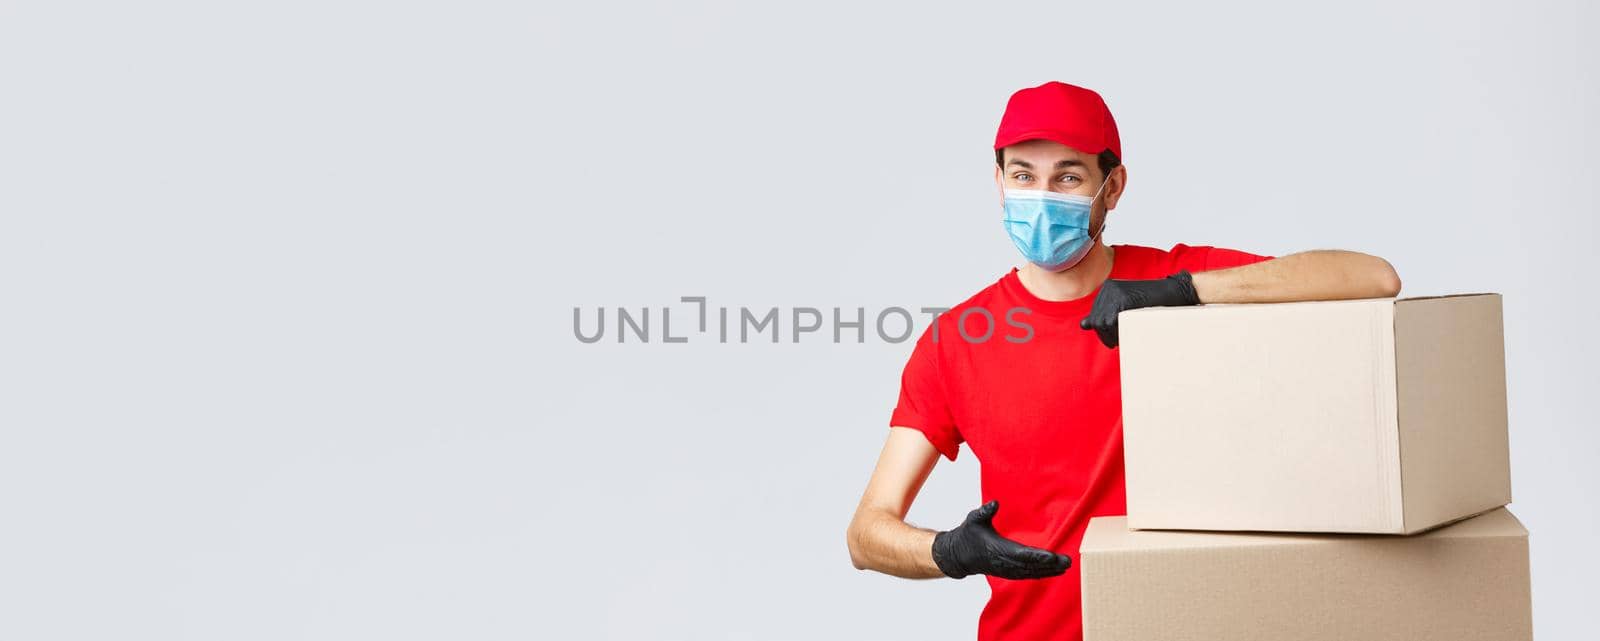 Packages and parcels delivery, covid-19 quarantine and transfer orders. Smiling courier in red uniform, gloves and medical face mask, introduce boxes to transfer your order, recommend service by Benzoix